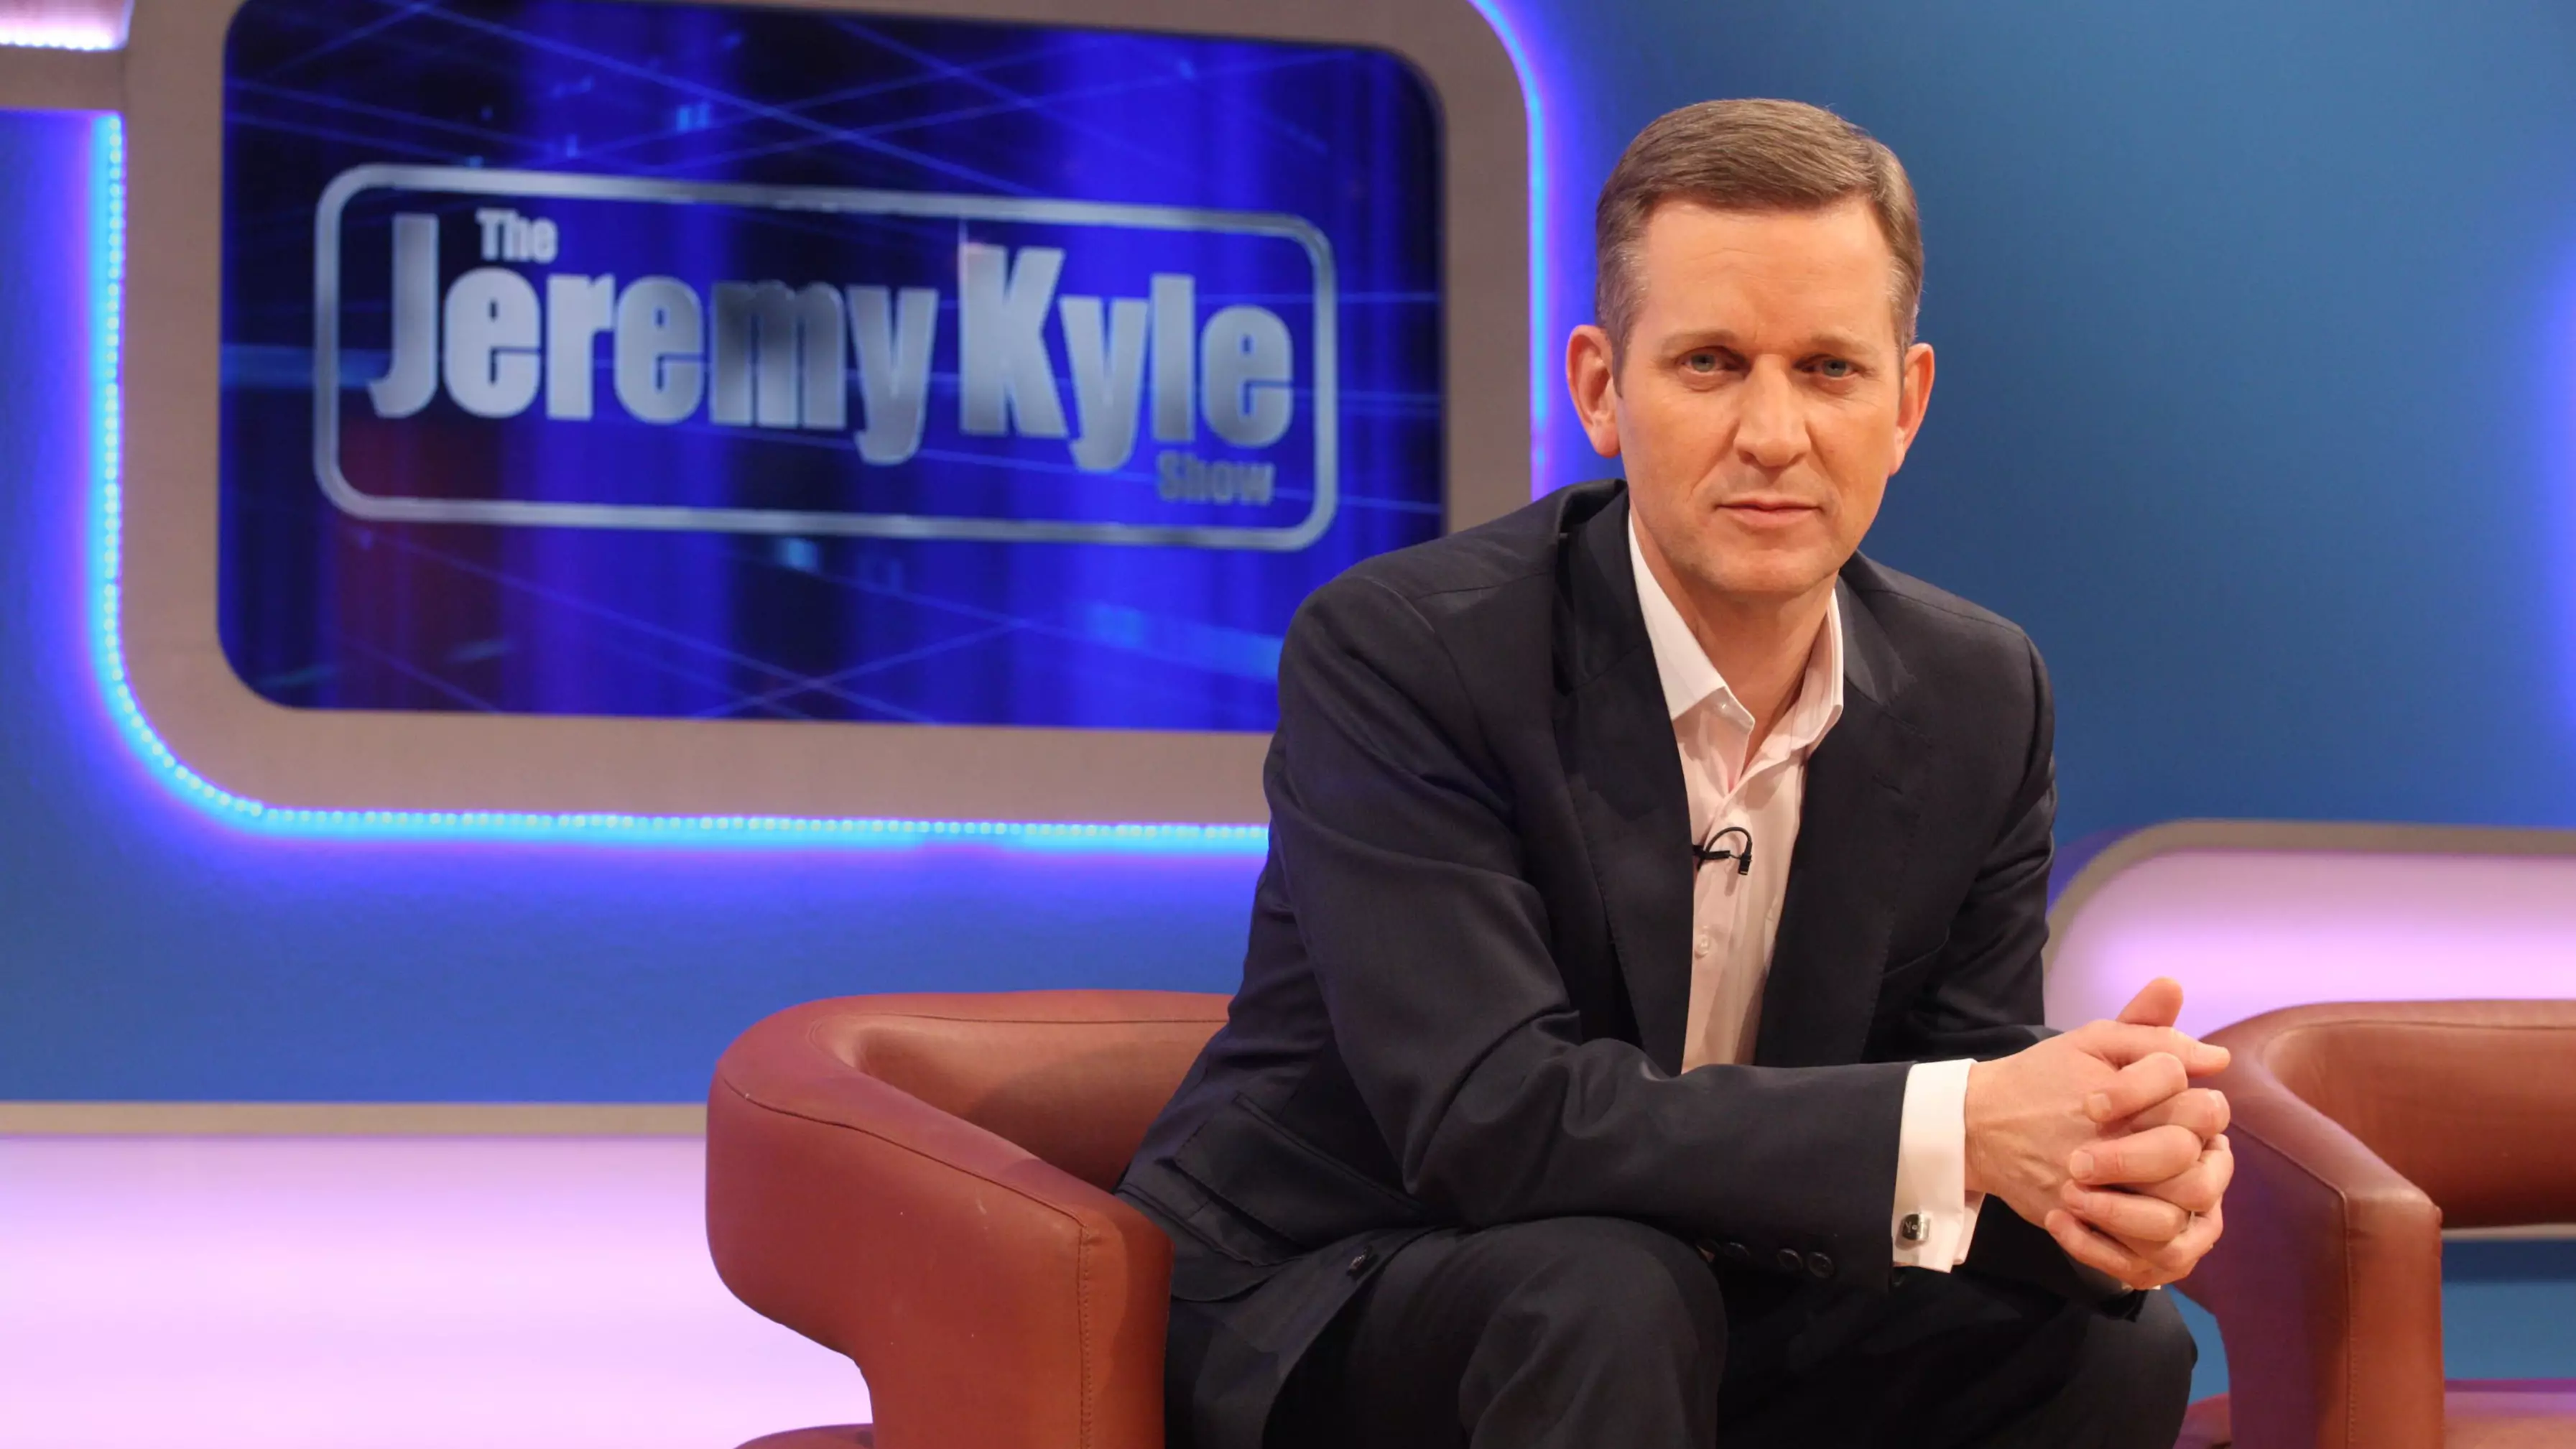 Jeremy Kyle Says He's 'Utterly Devastated' Over Death Of Guest In New Statement